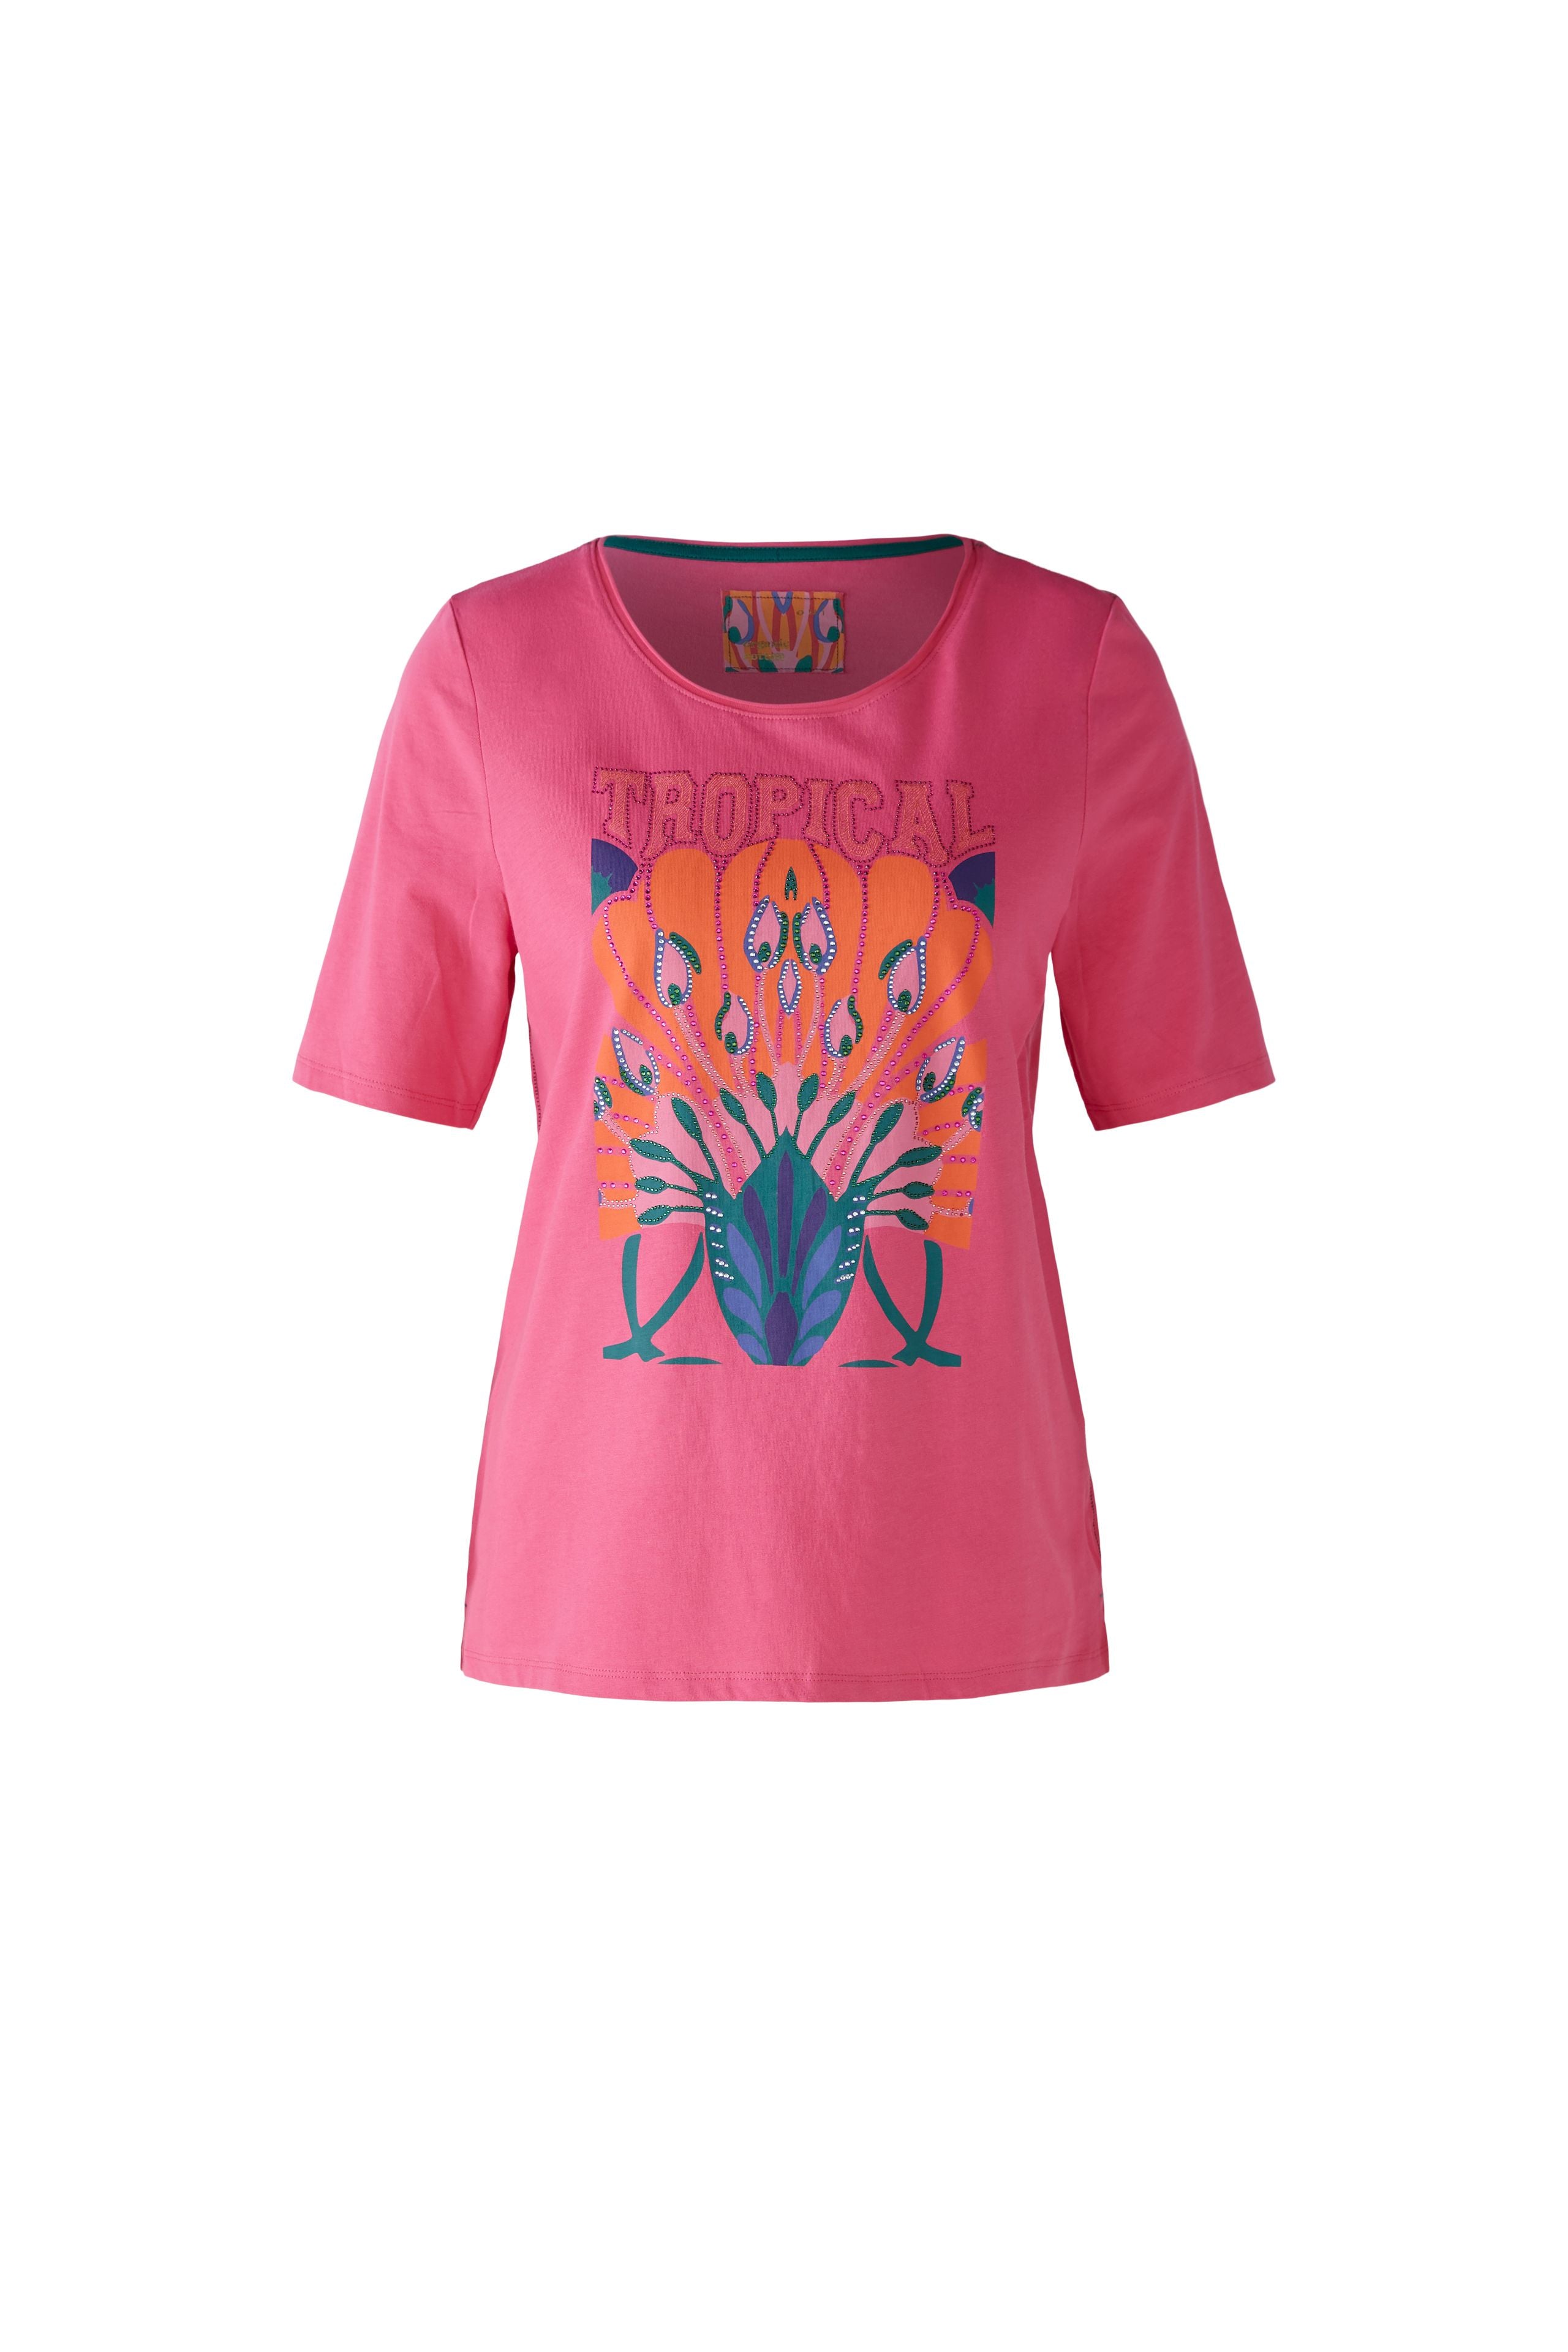 Oui Tropical Pink T-shirt In Pink Multi